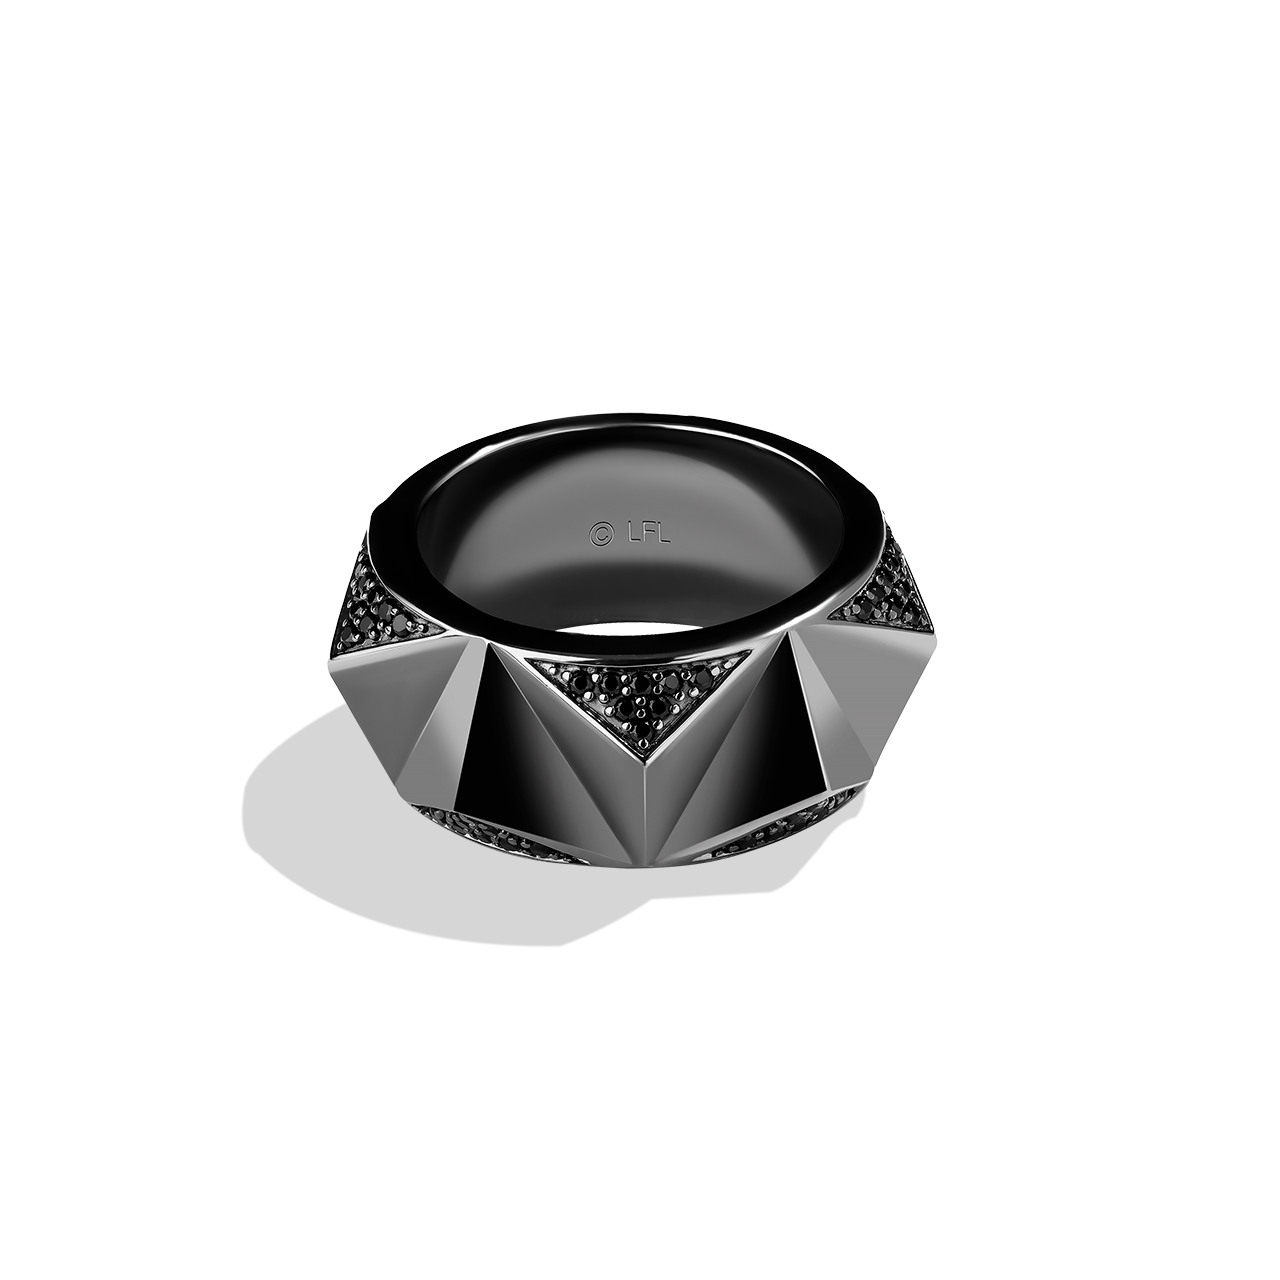 Notebook Zeal finished black swarovski mens ring Consecutive Isolate ...